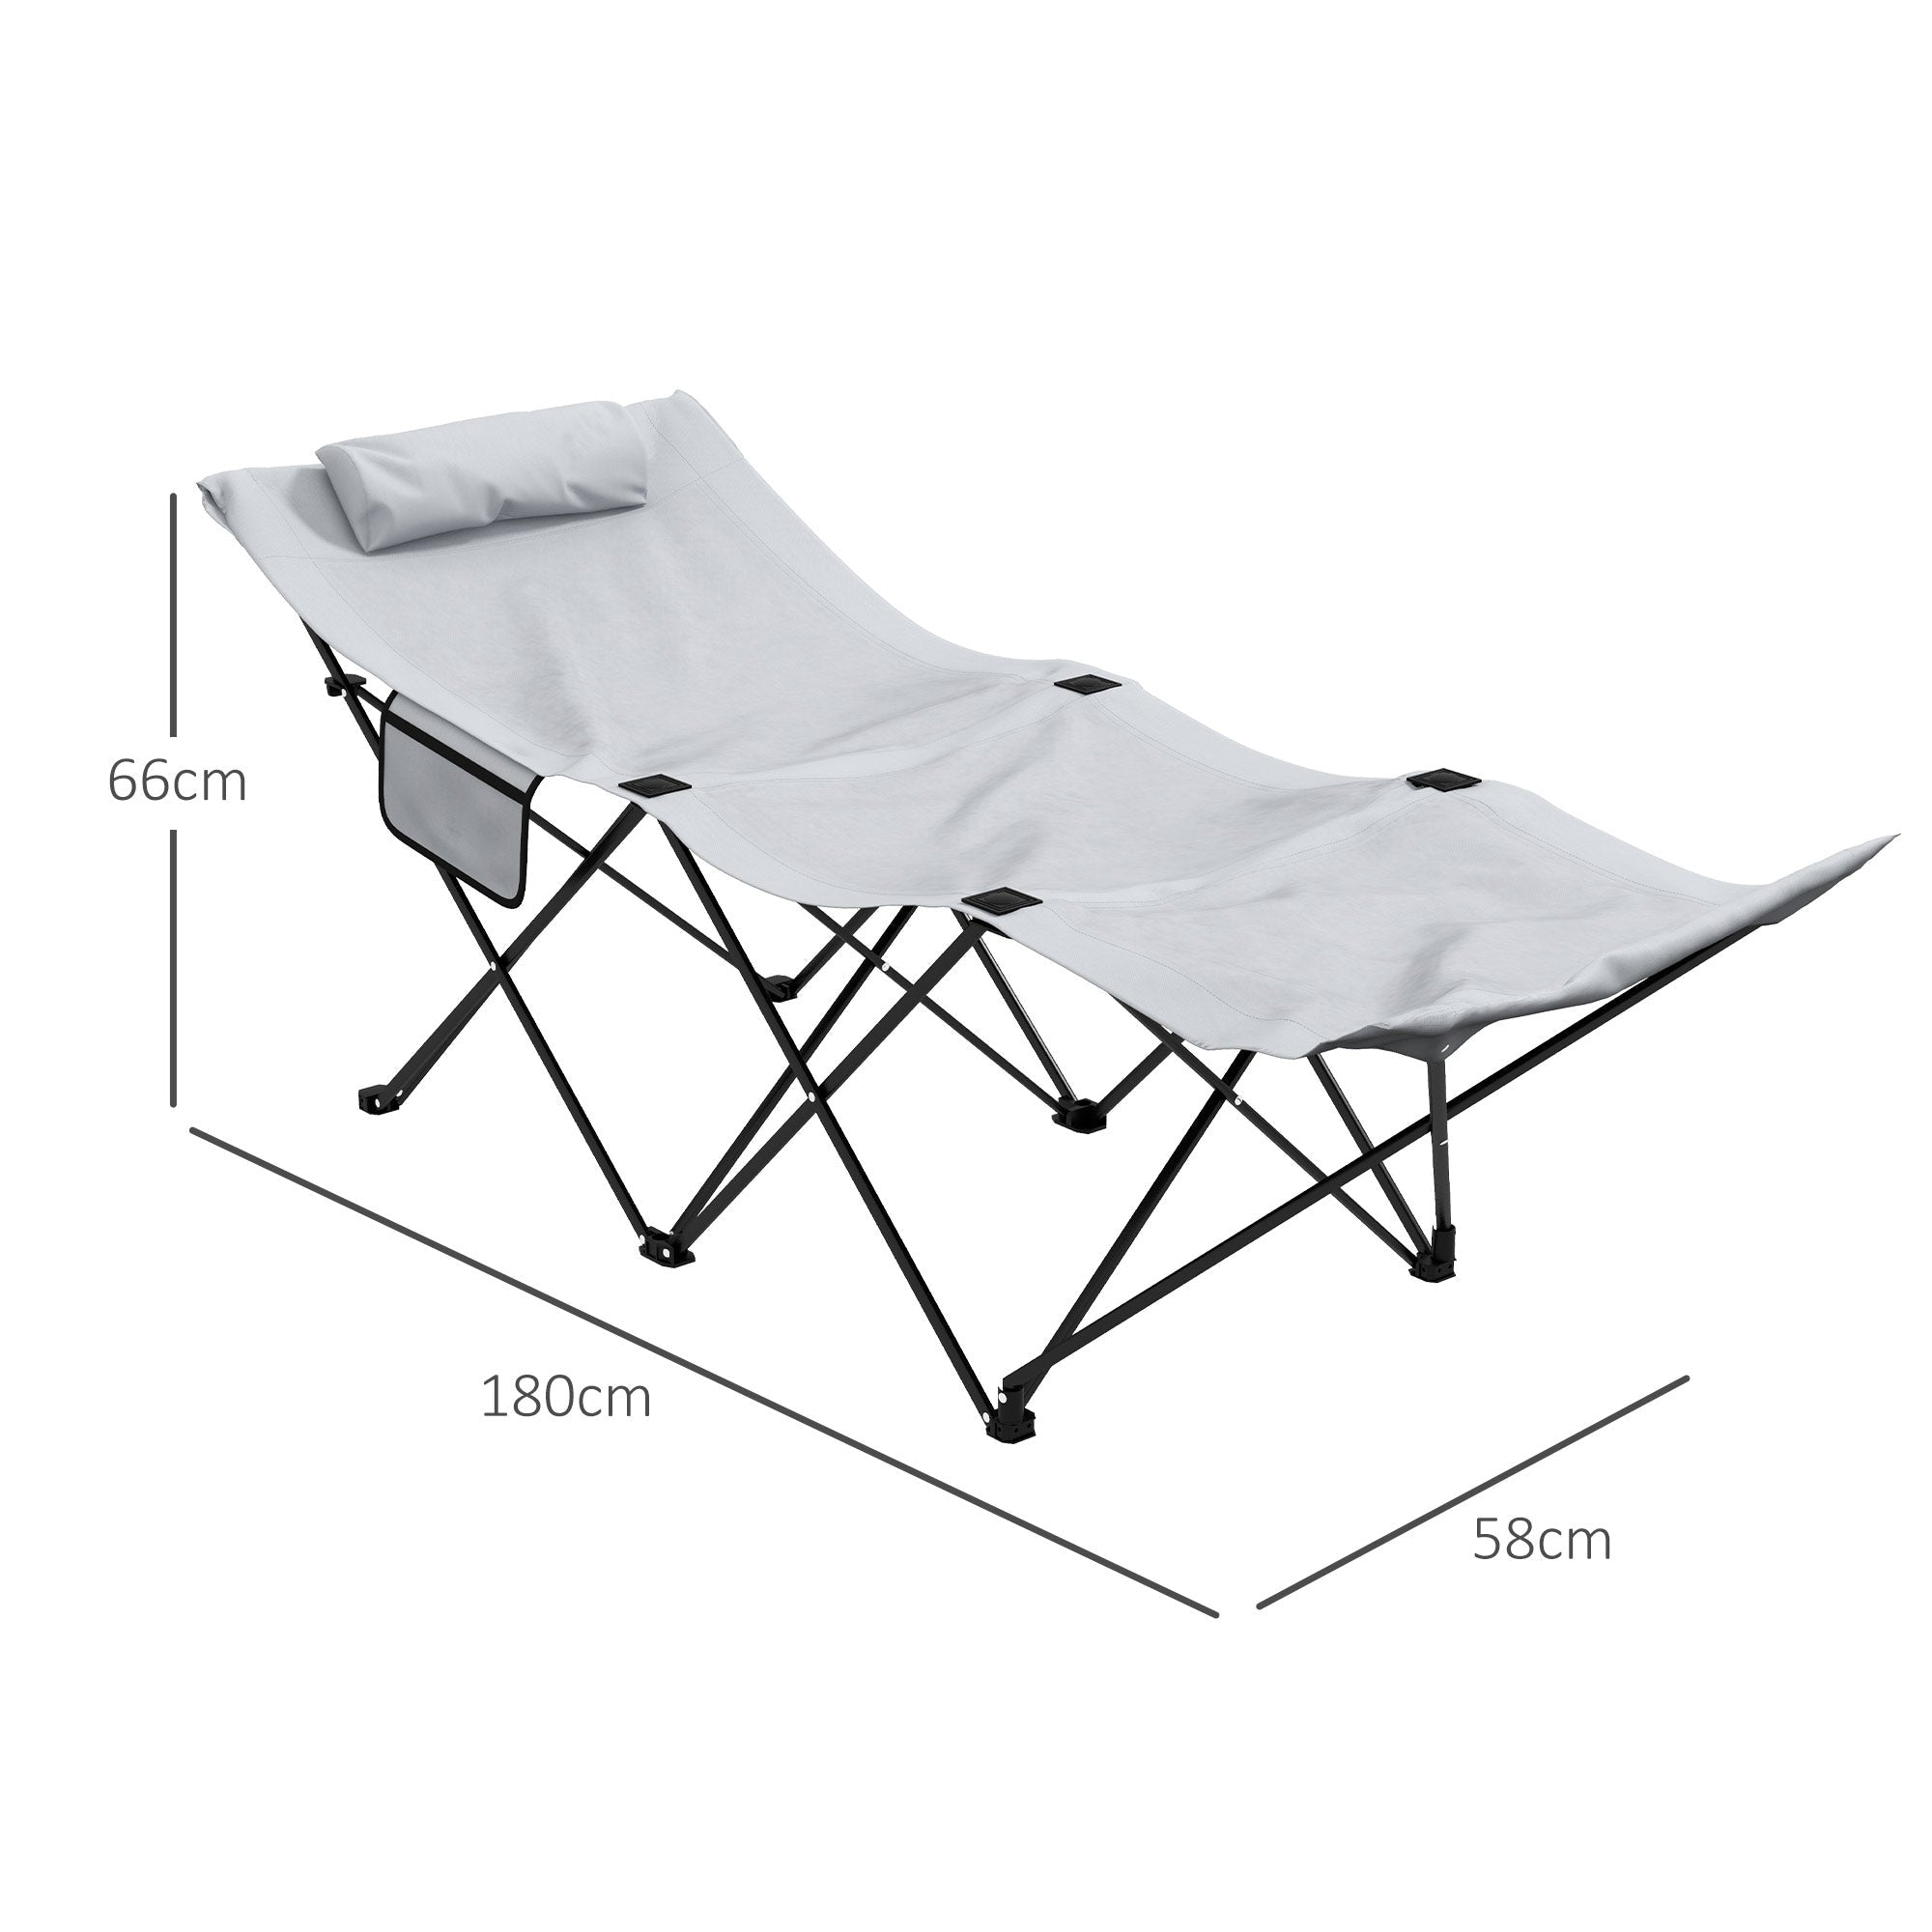 Foldable Sun Lounger, Outdoor Tanning Sun Lounger Chair with Side Pocket, Headrest, Oxford Seat, for Beach, Yard, Patio, Light Grey-2